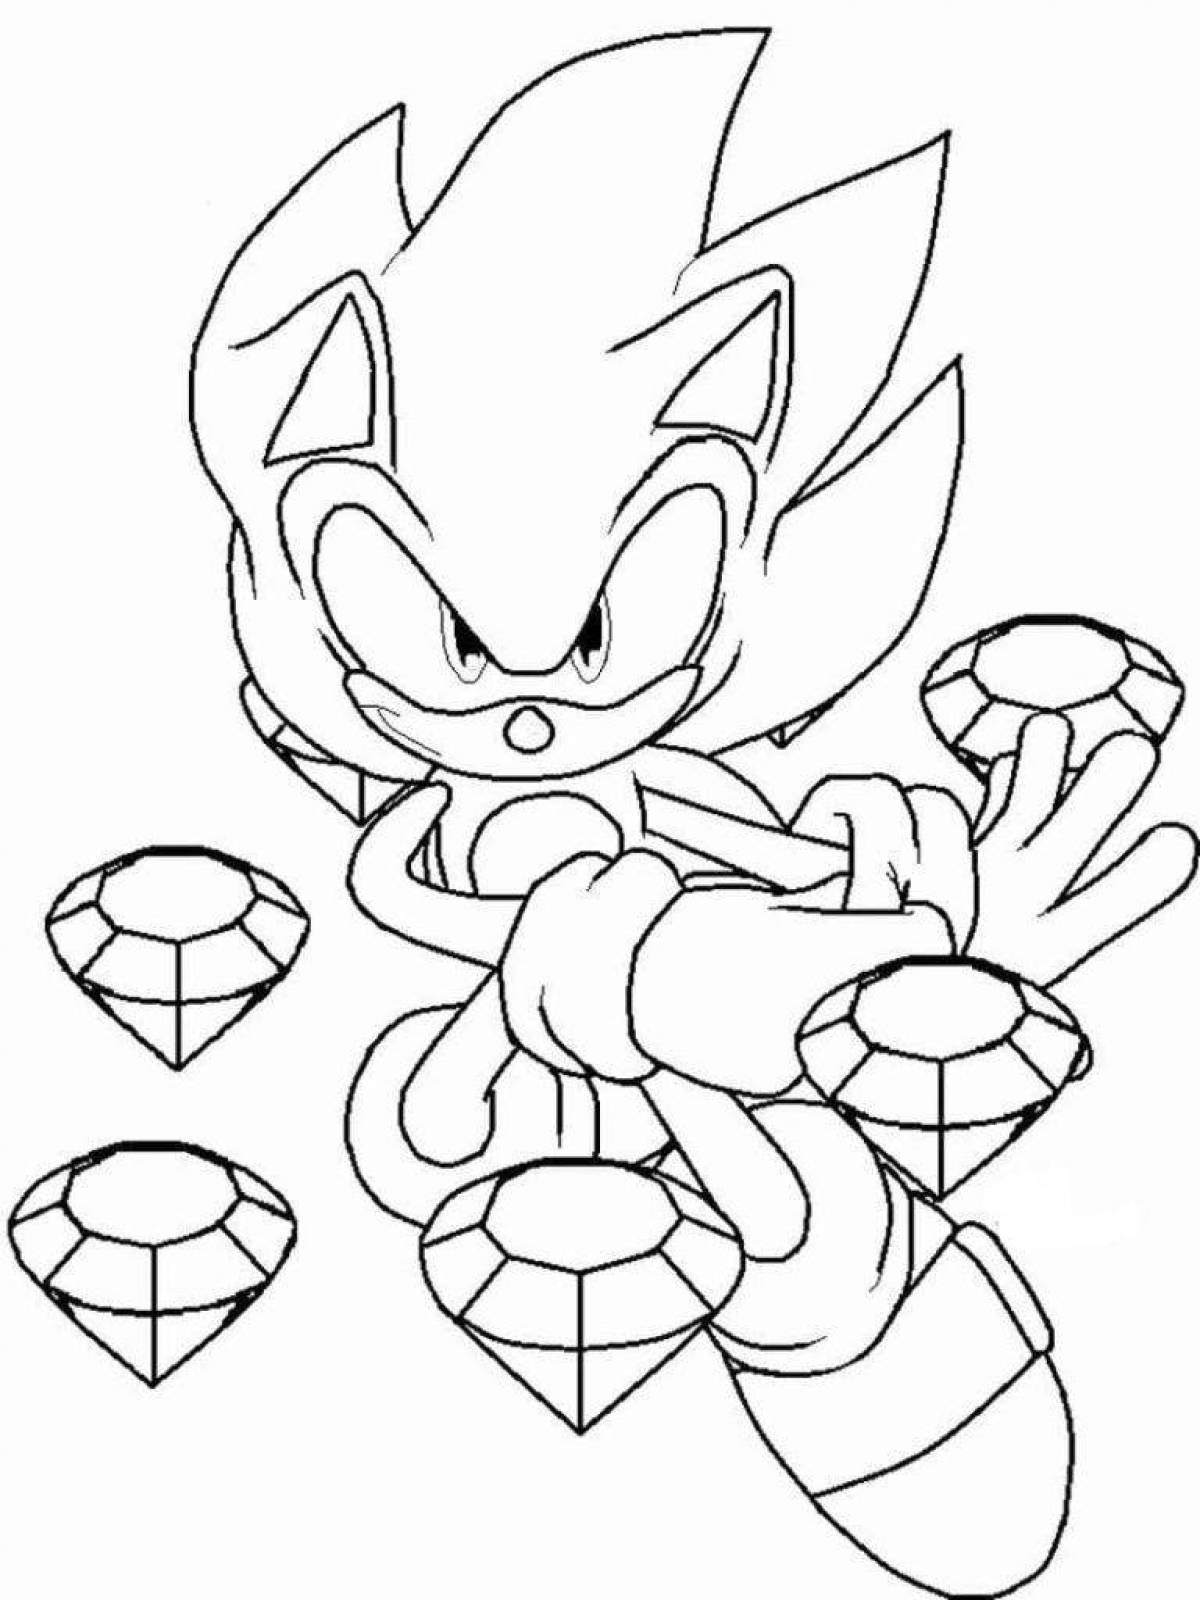 Exquisite sonic drawing coloring book